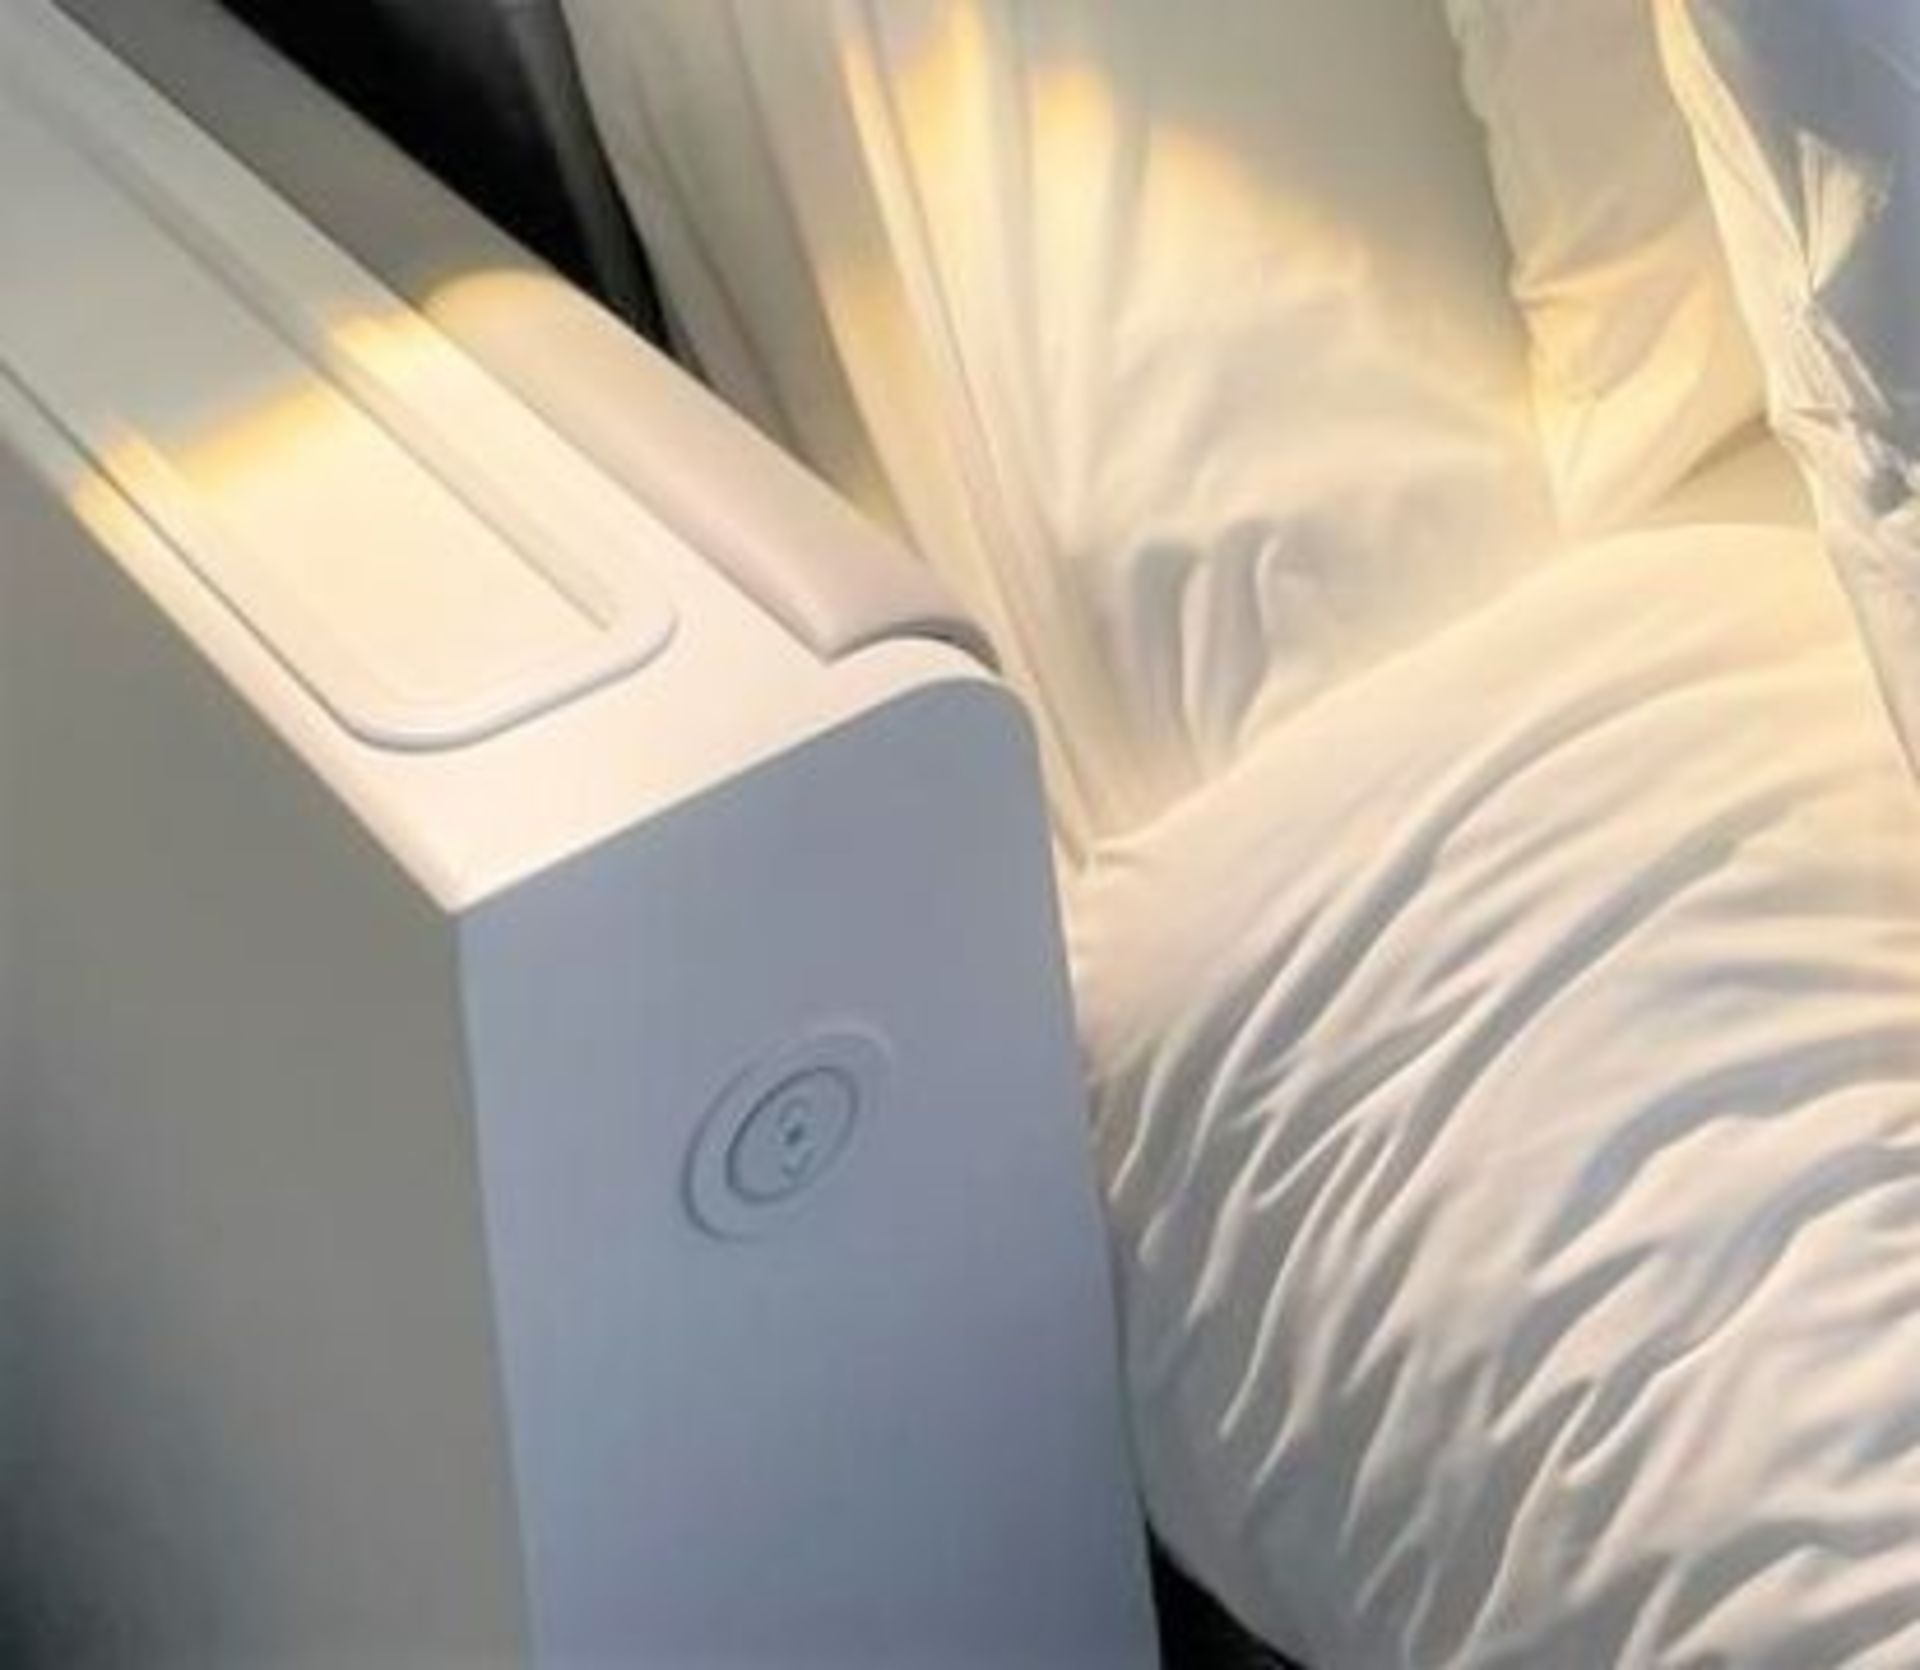 1 x Double Adjustable Space Saving Smart Bed With Serta Motion Memory Foam Mattress - Signature - Image 3 of 8